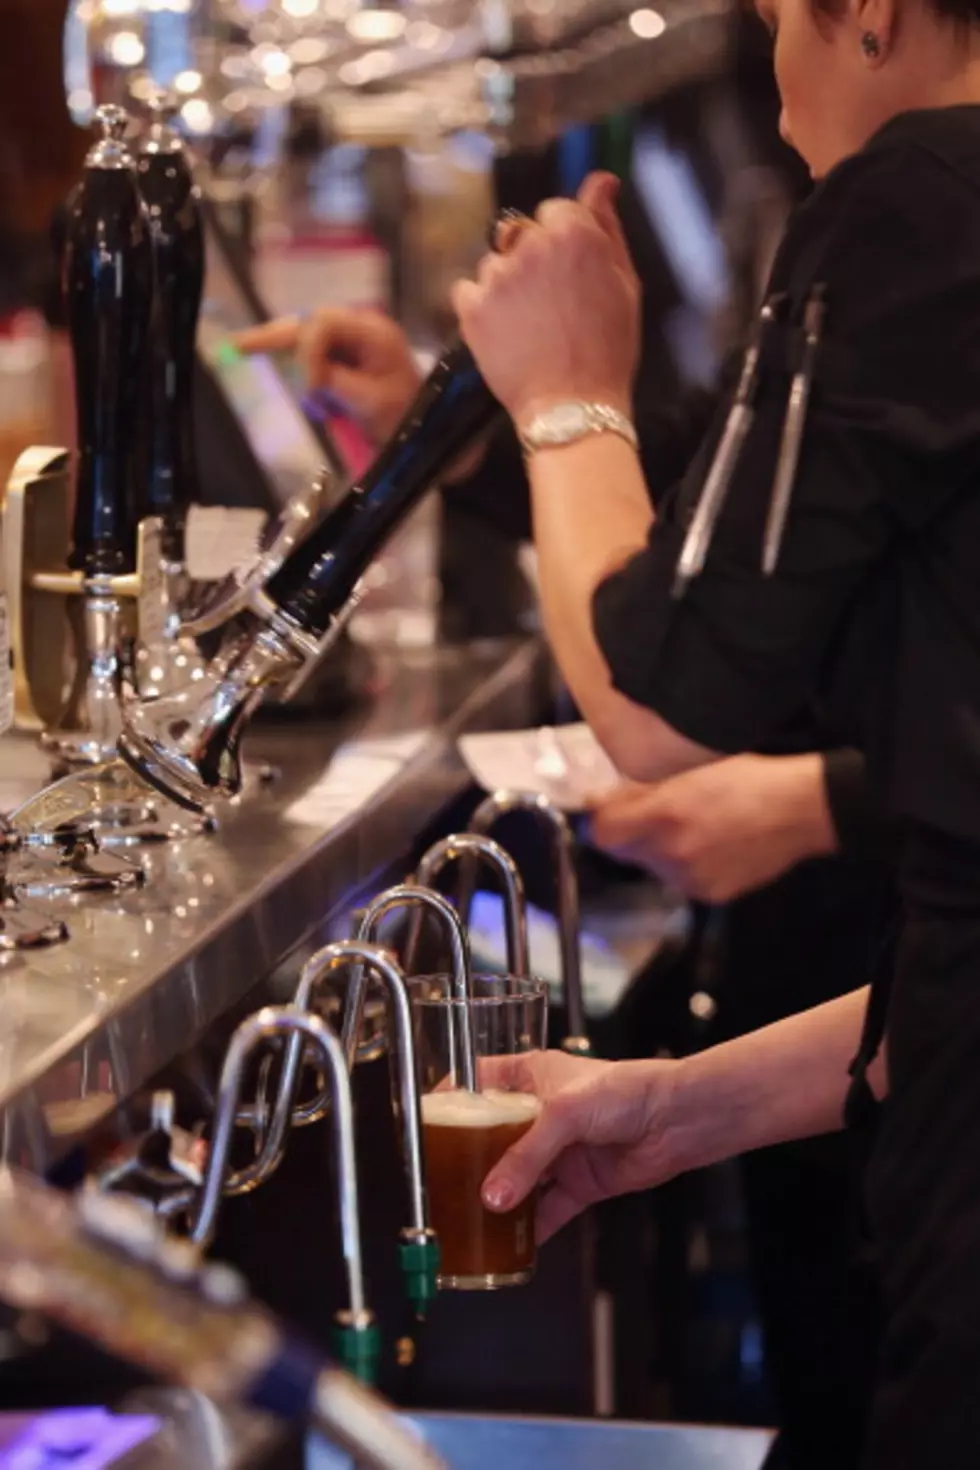 What If Guys And Gals Switched Roles At The Bar? [VIDEO]